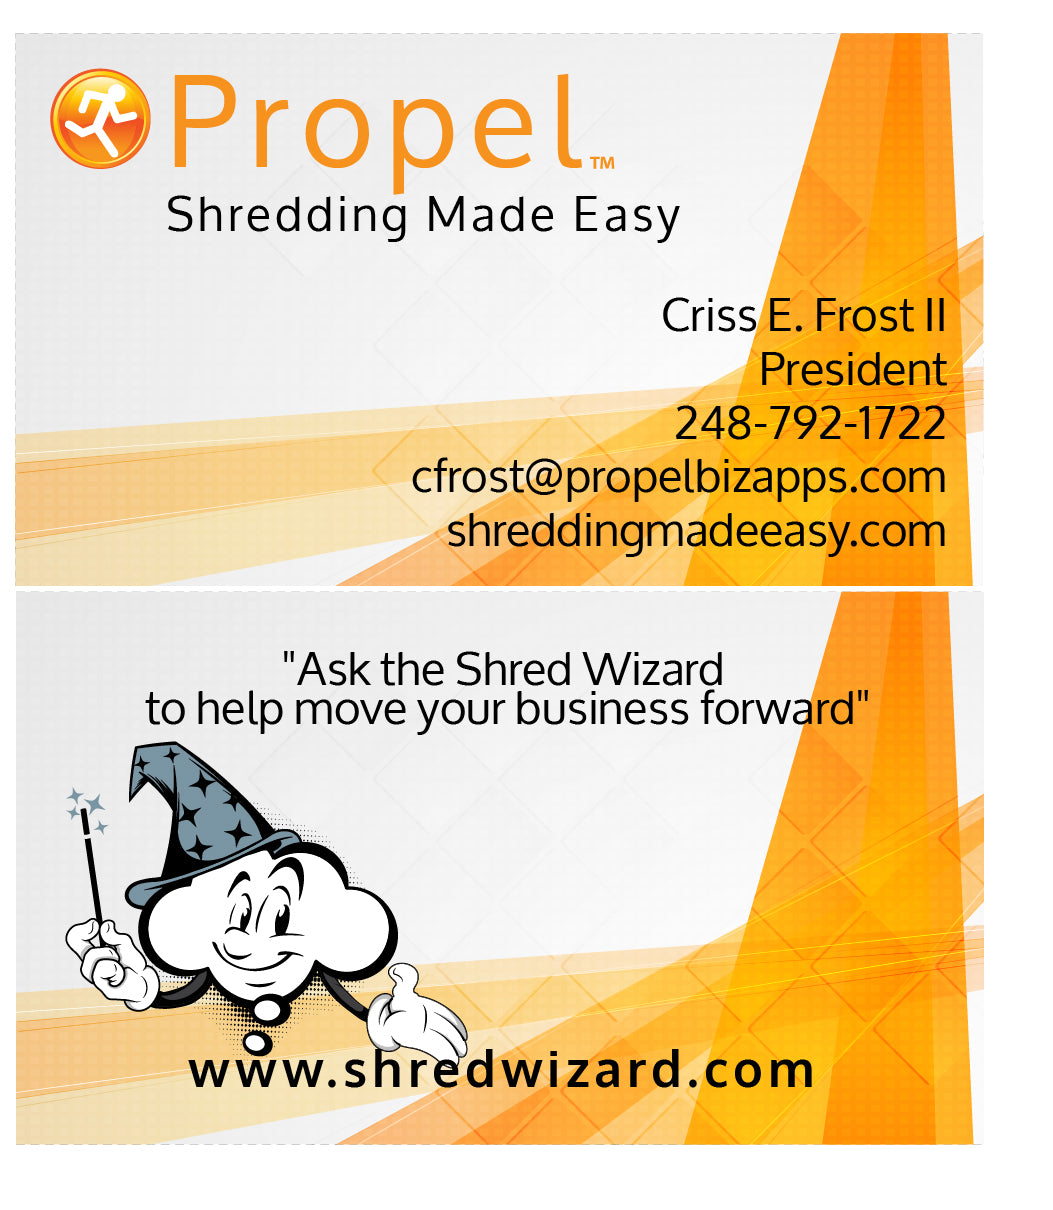 Propel Biz Apps Logo Design, Mascot and Collateral